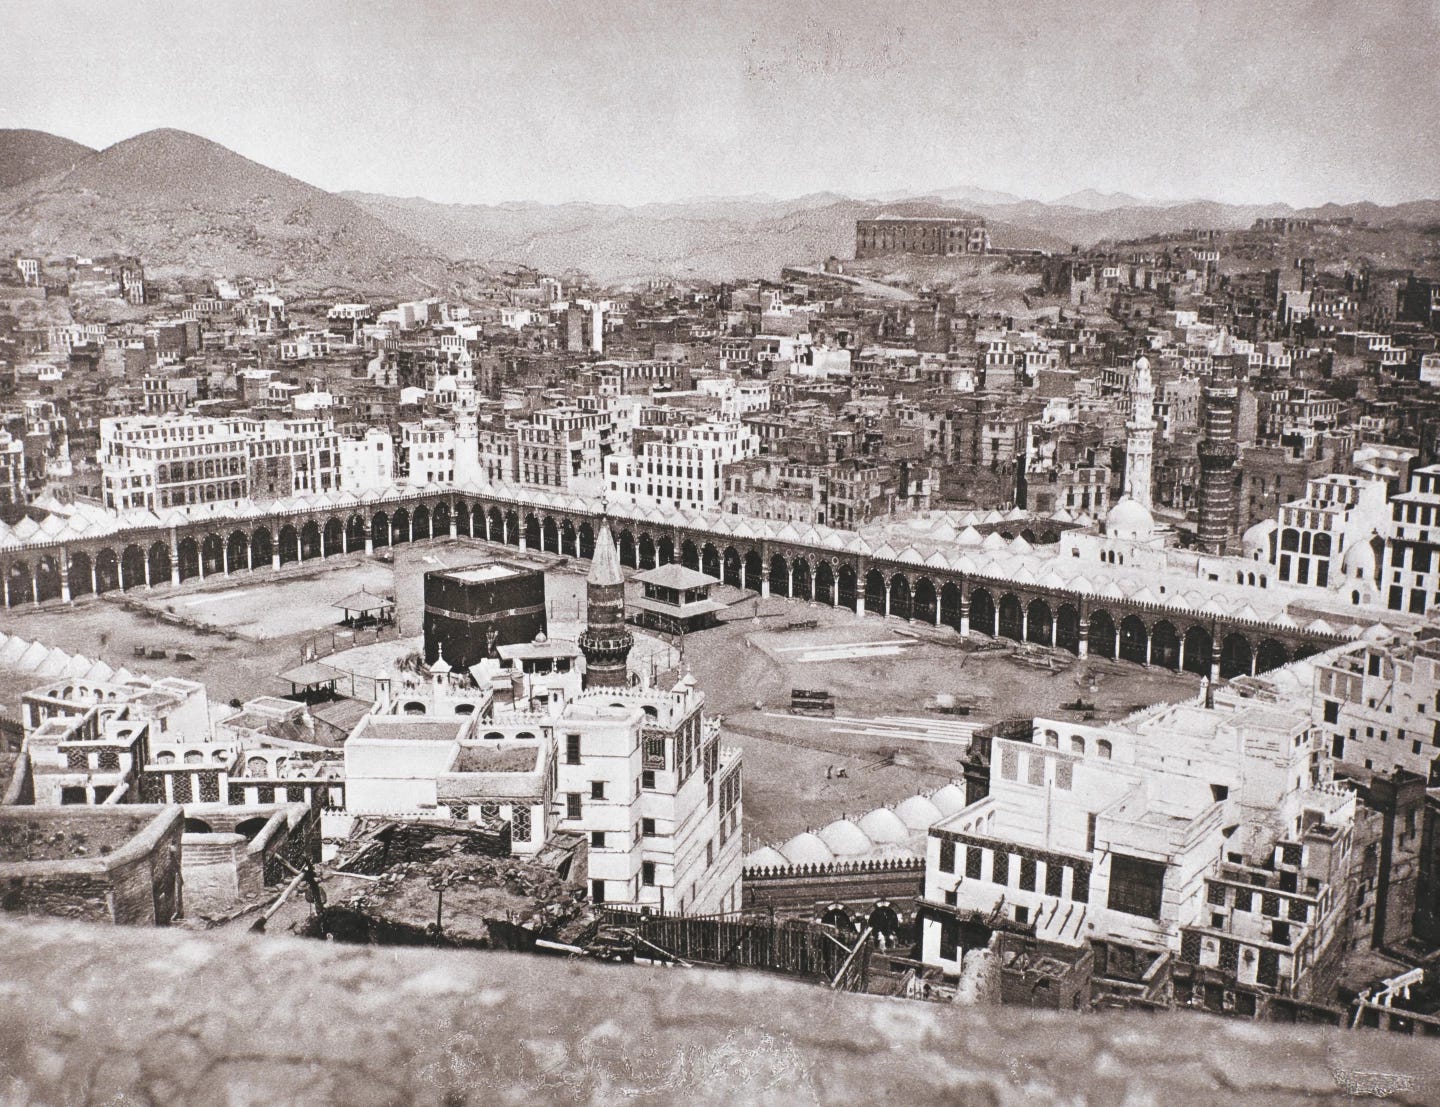 Black and white photo of the al Haram mosque, the Ka'aba at the center of its large rectangular courtyard, and city buildings of Mecca, taken from above on one of the hills surrounding the city. 